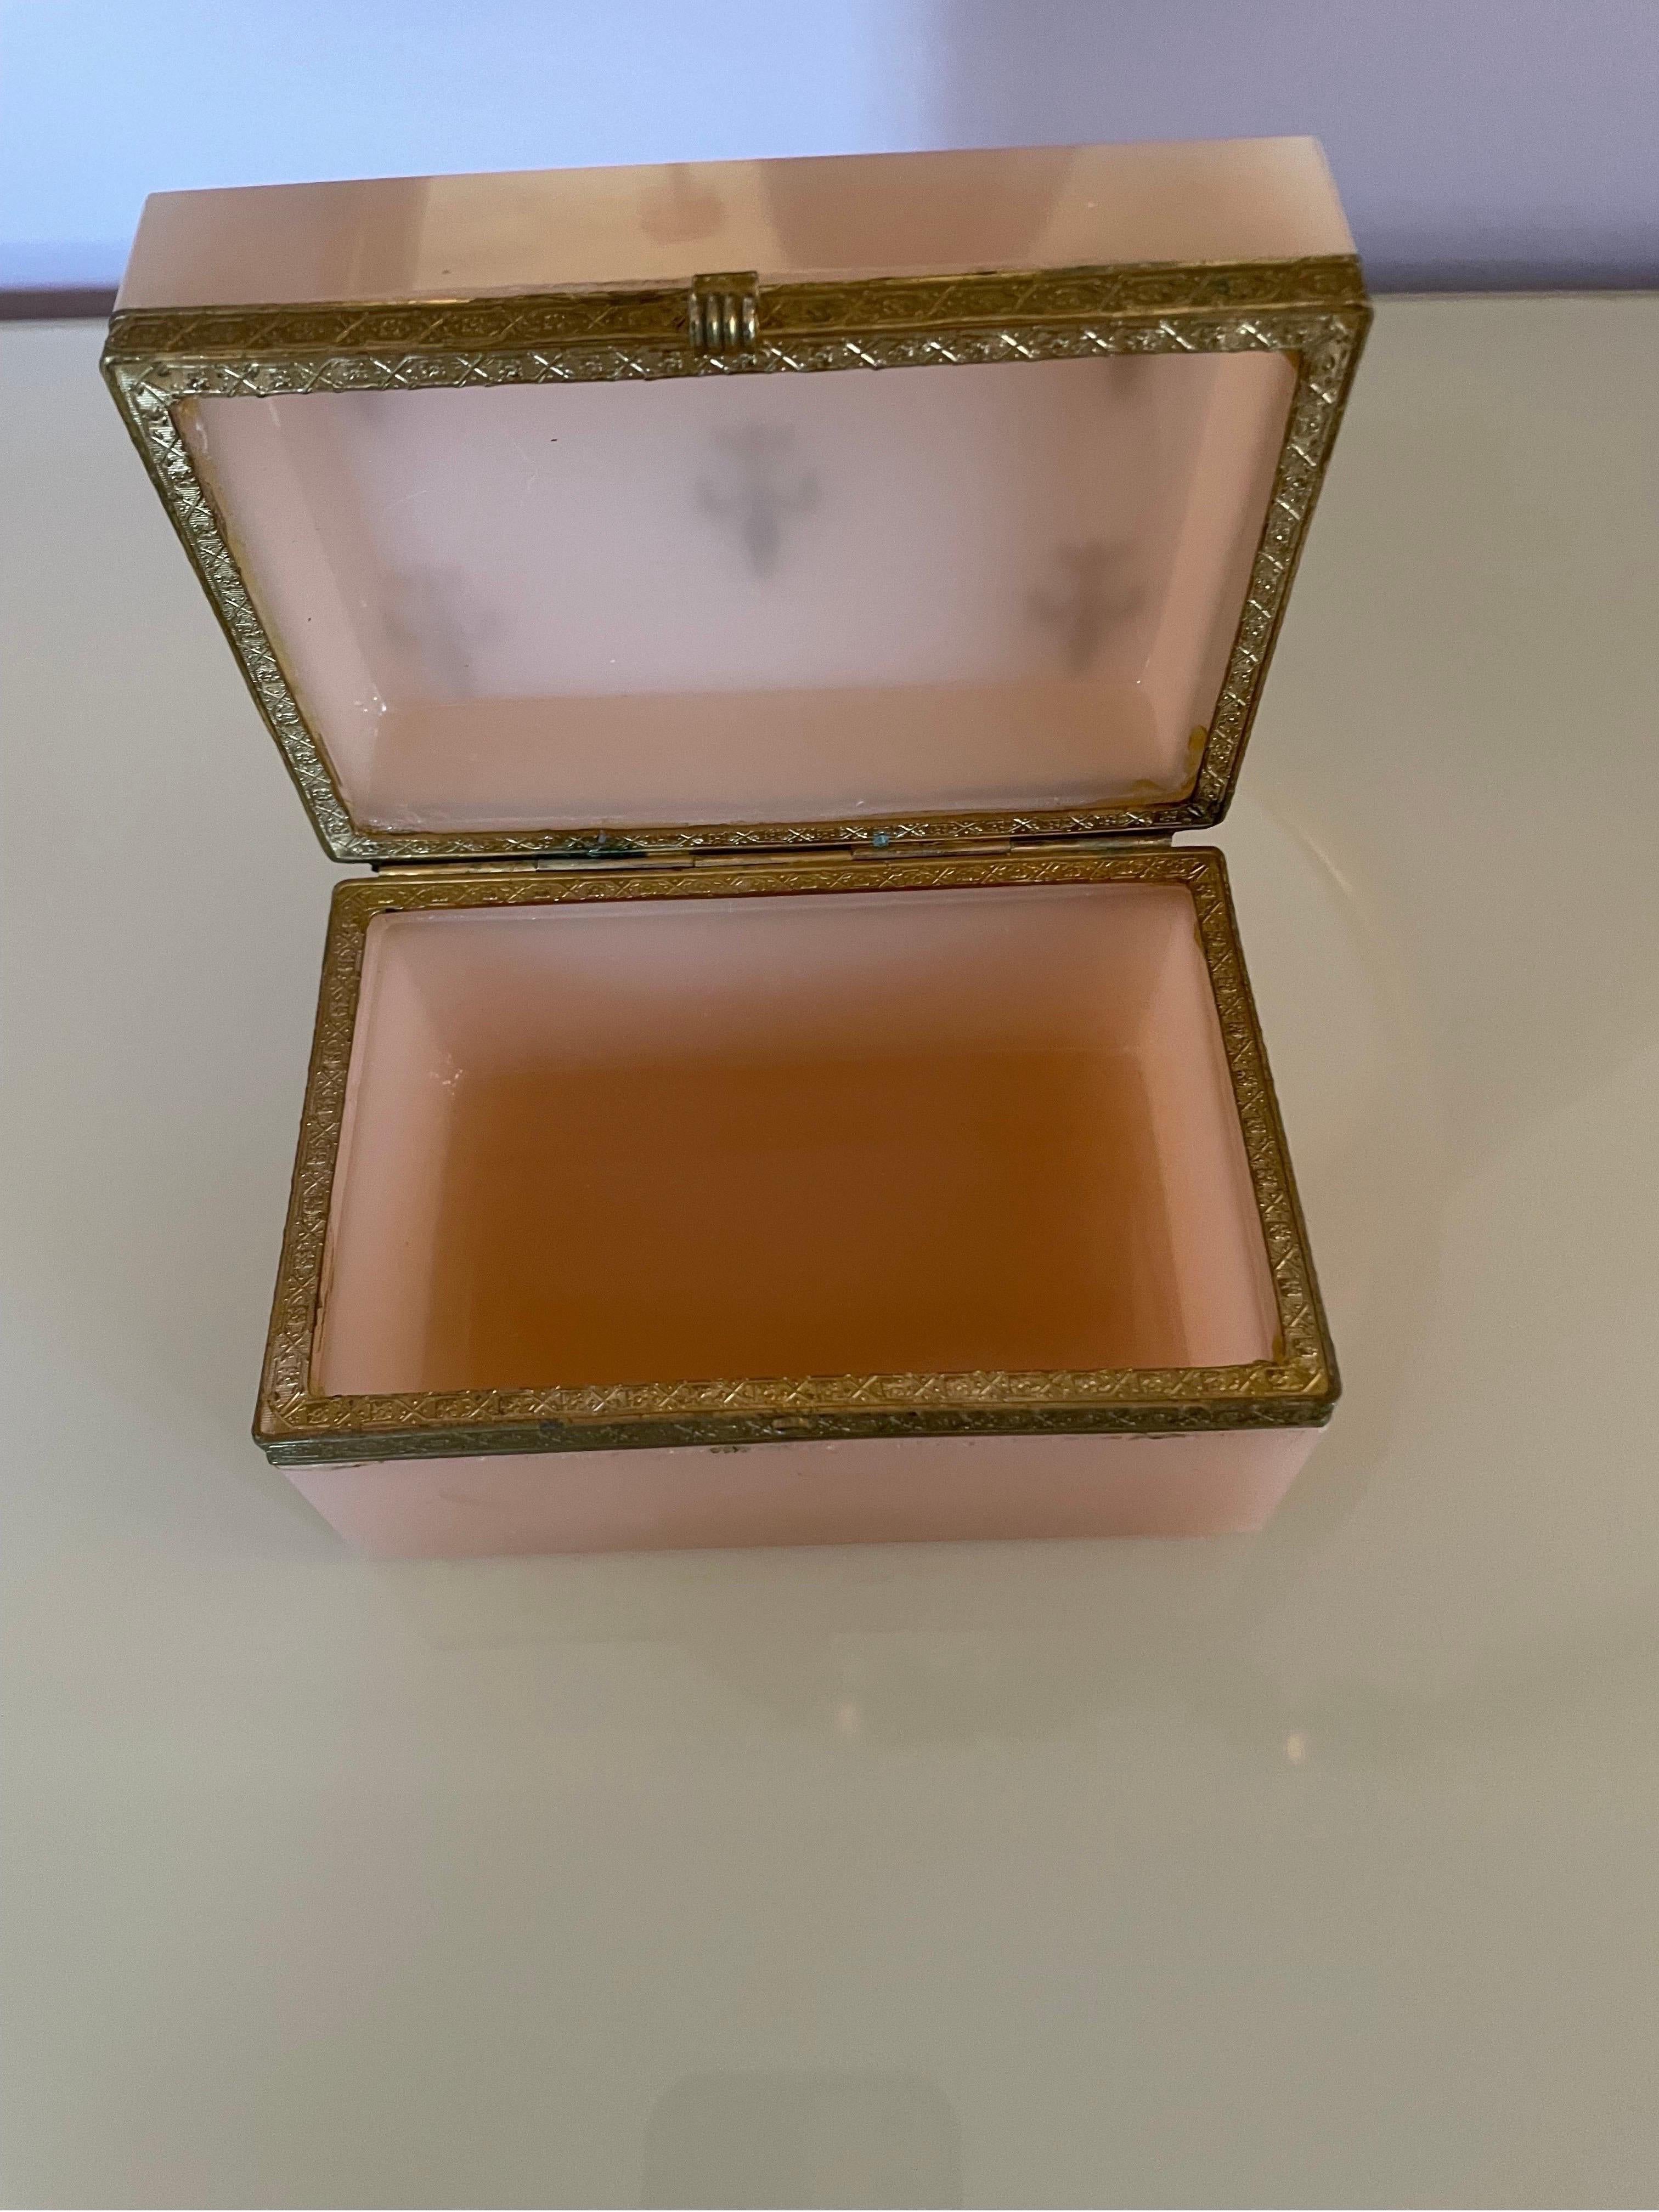 This is a heavy vintage opaline box probably from the 1950s 
It is a pale pink color with gold fleurdelis on top 
It has no cracks or chips and has gold ormolou around the box.